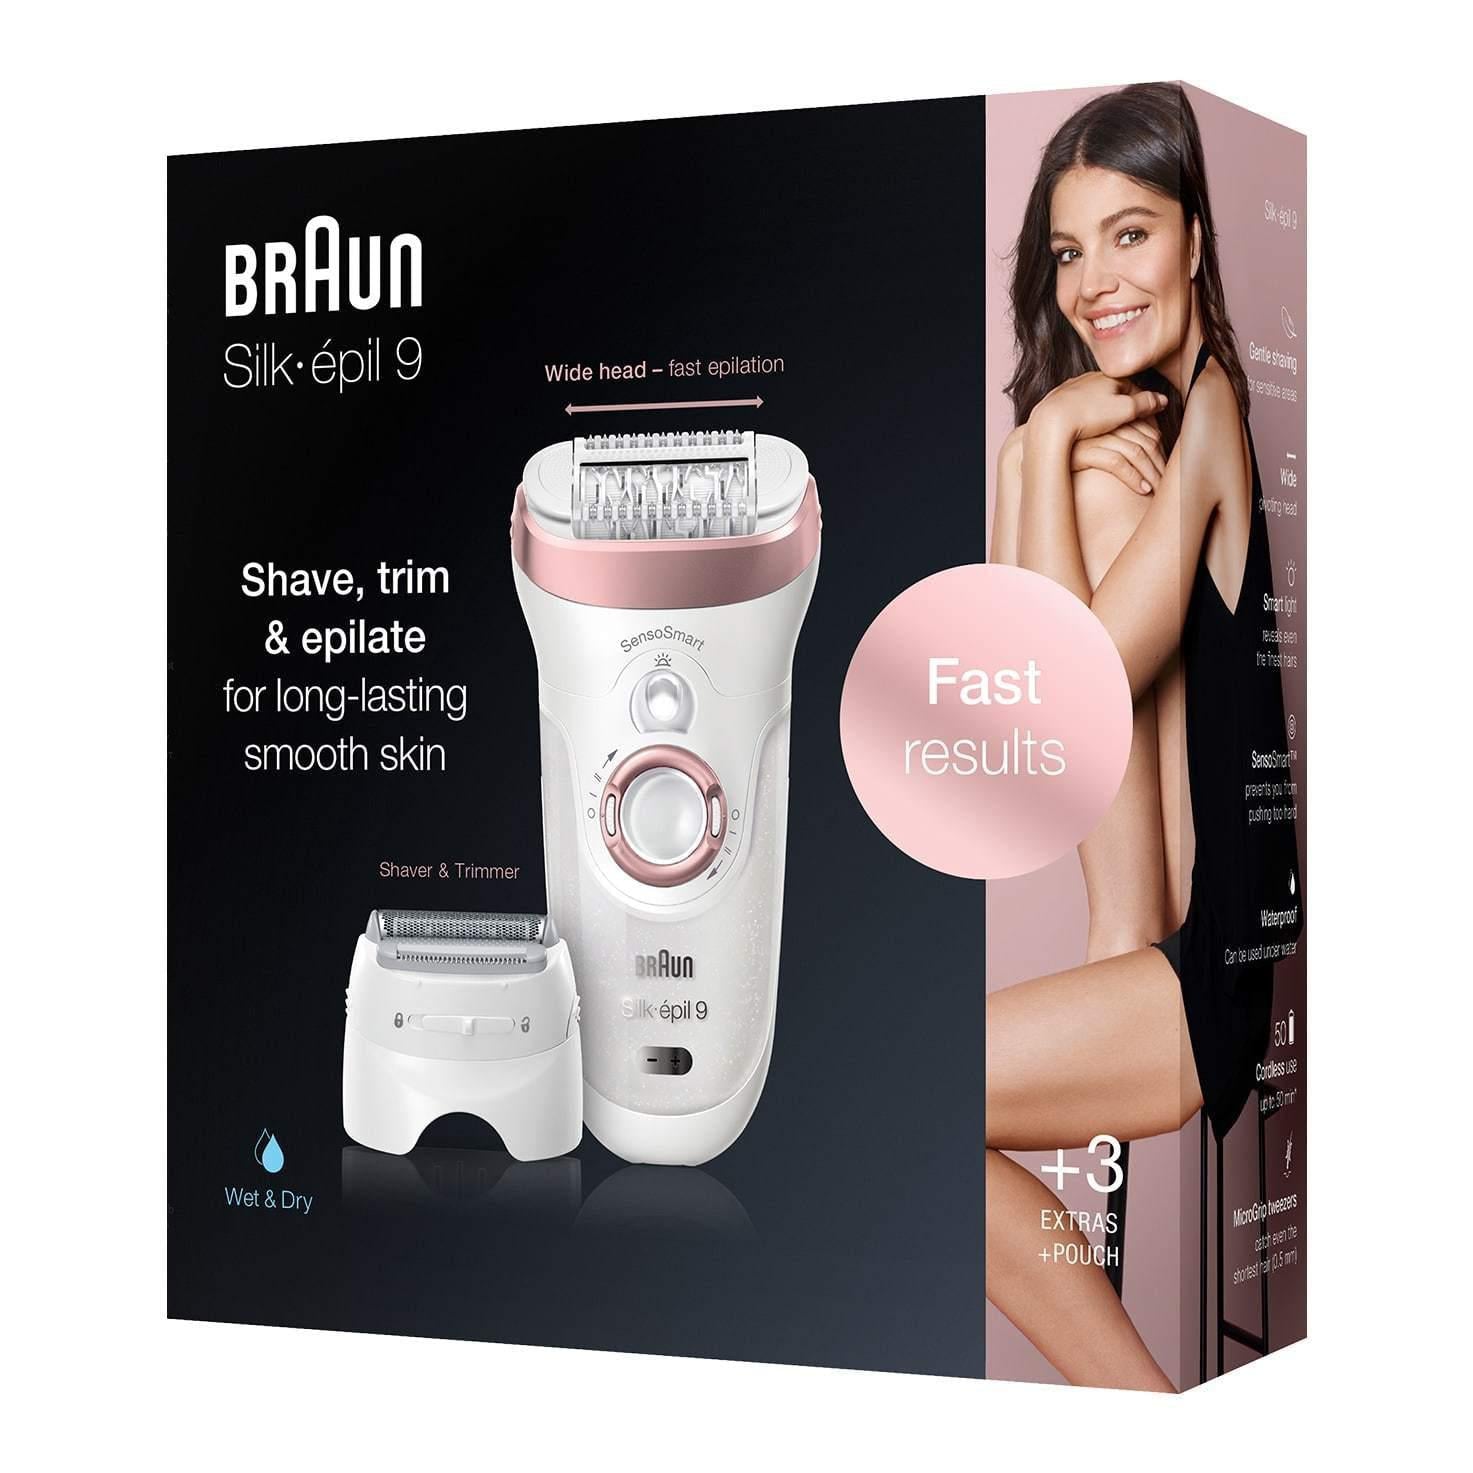 Braun Women's Silk-épil 9-720 Wet and Dry Epilator with 4 Extras - Pink/White - Healthxpress.ie